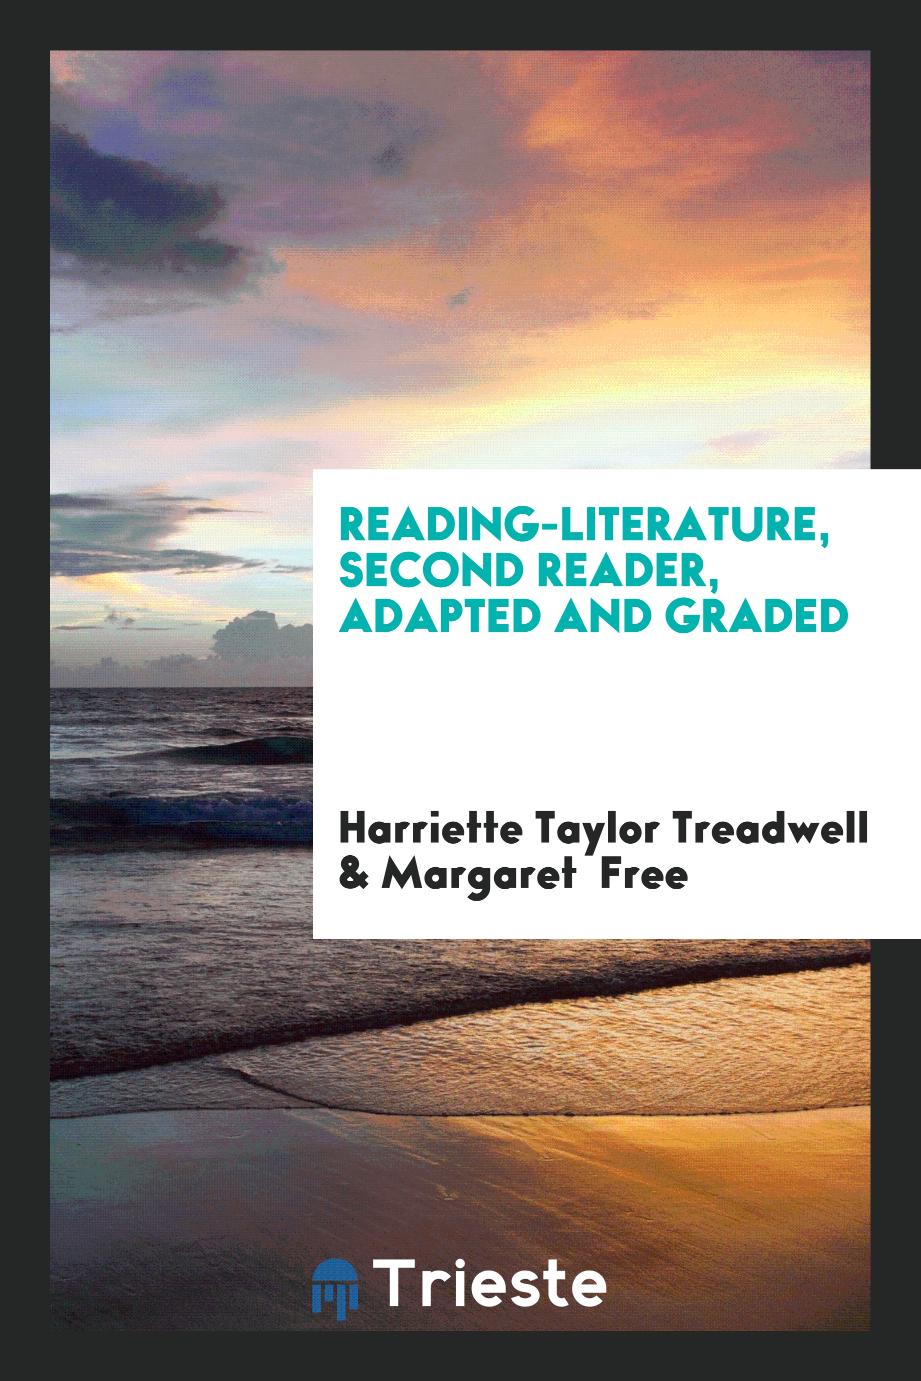 Reading-Literature, Second Reader, Adapted and Graded